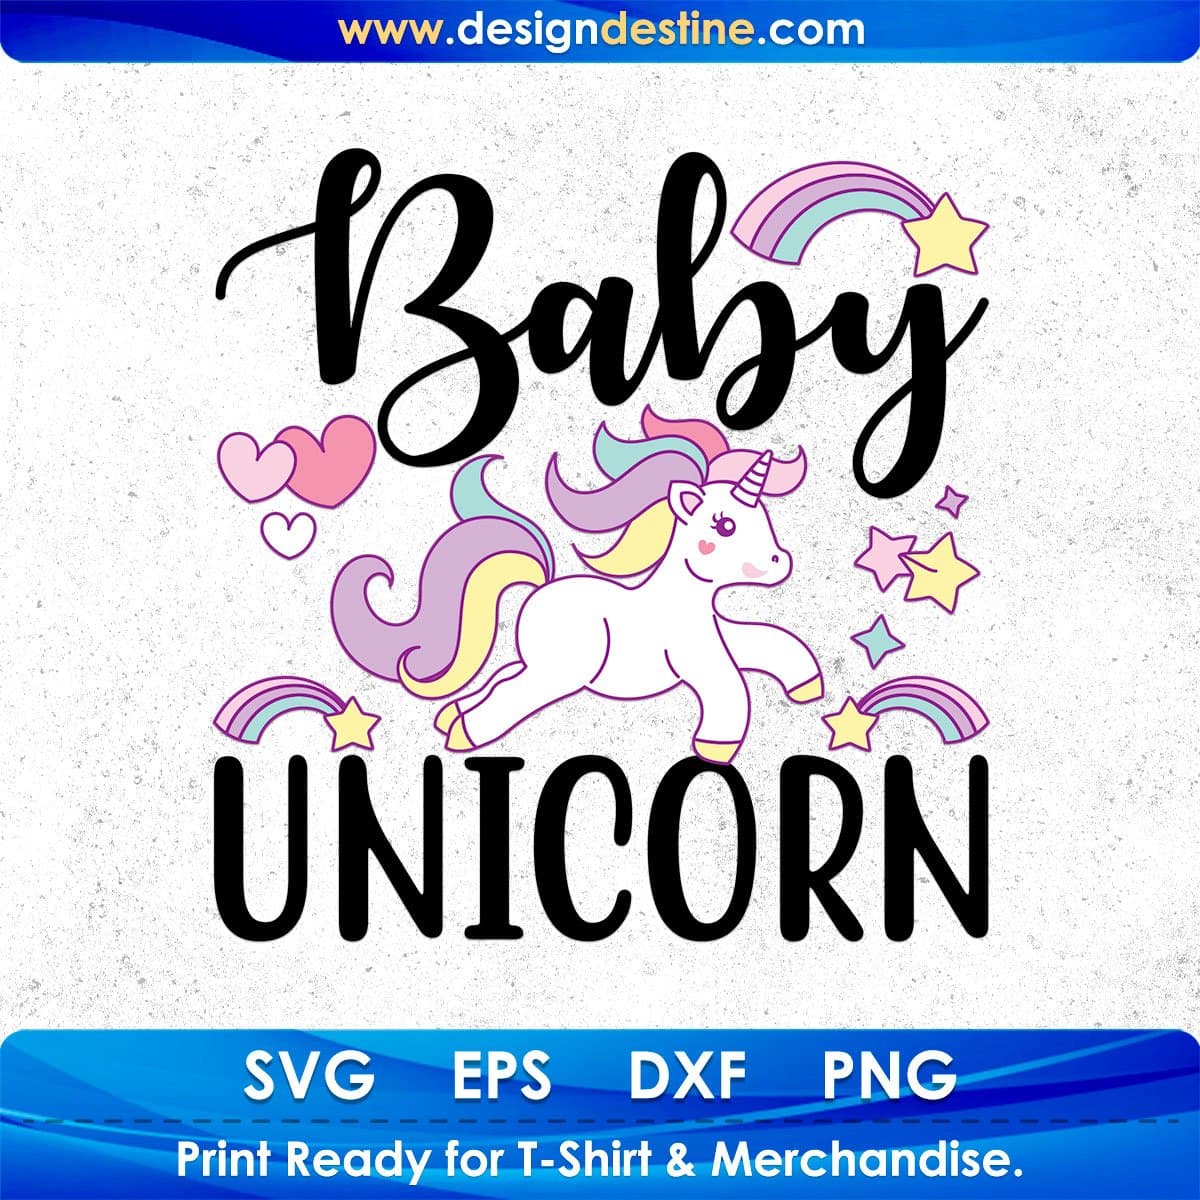 Baby Unicorn T shirt Design In Svg Png Cutting Printable Files